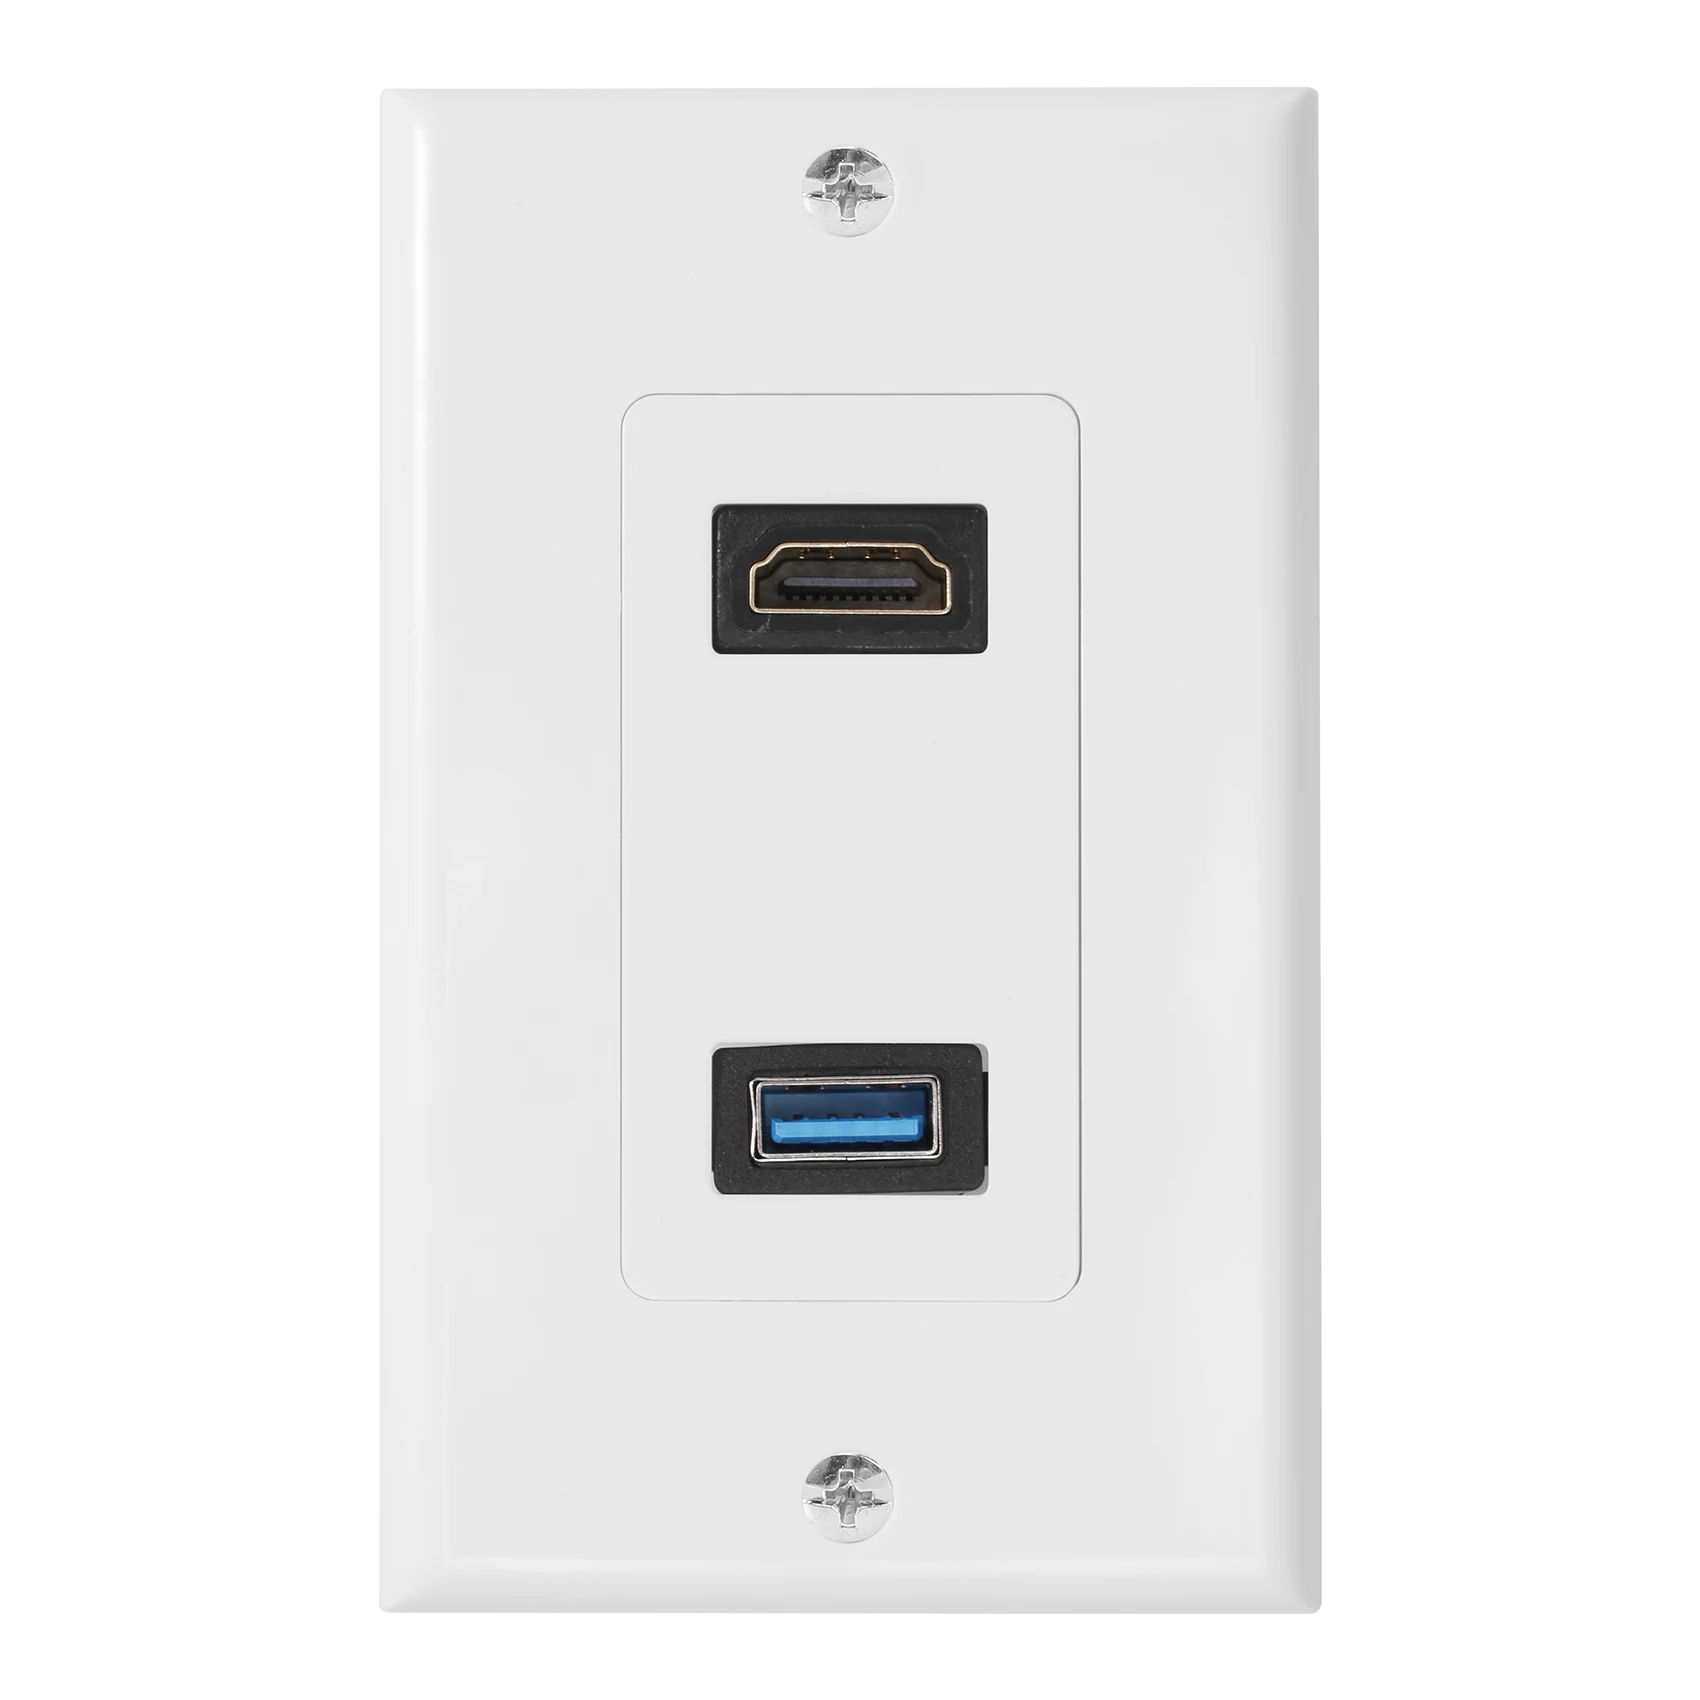 

1x 2Port HDMI+USB 3.0 Female Wall Face Plate Panel Outlet Socket Extender White